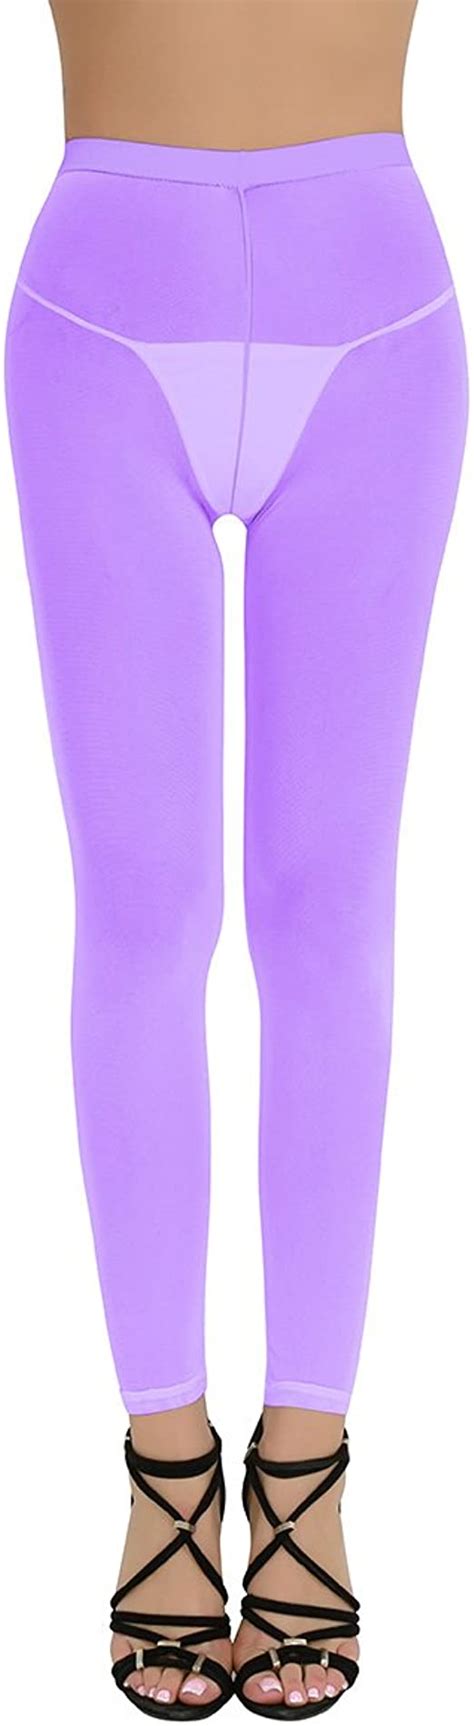 Acsuss Womens Semi Opaque Tights Sheer Footless Pantyhose Seamless